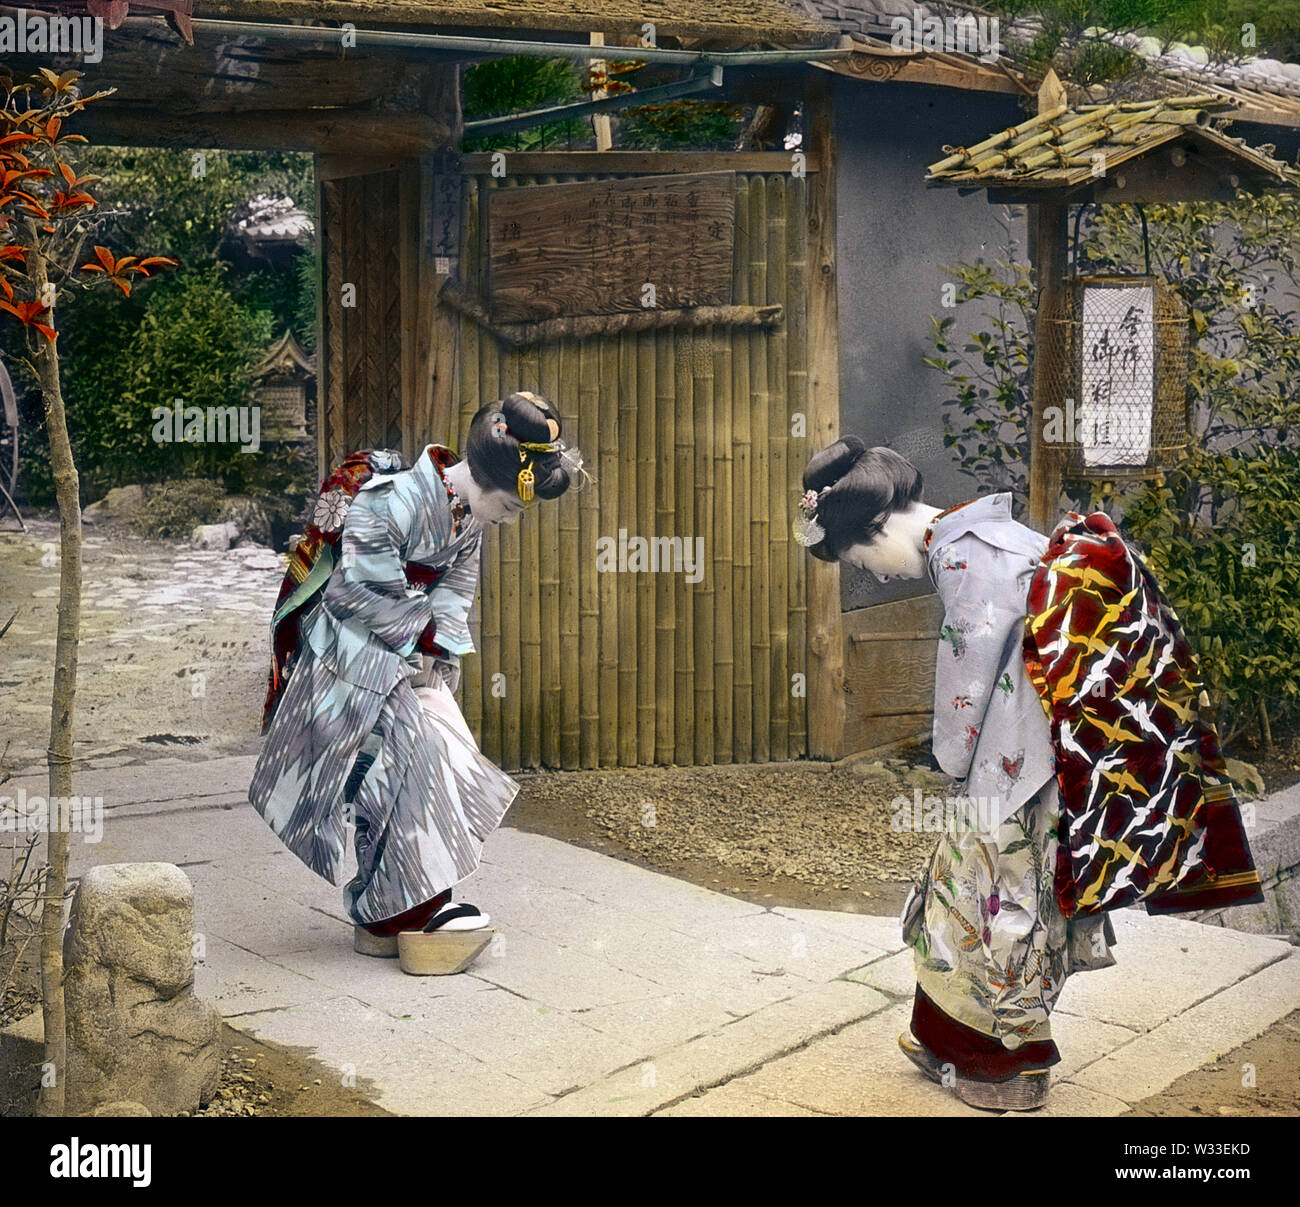 [ 1890s Japan - Japanese Women Greeting ] —   Two women wearing kimono, geta and traditional hairstyles bow to each other at the entrance gate to Genkyu-en Gardens in Hikone, Shiga Prefecture.  19th century vintage glass slide. Stock Photo